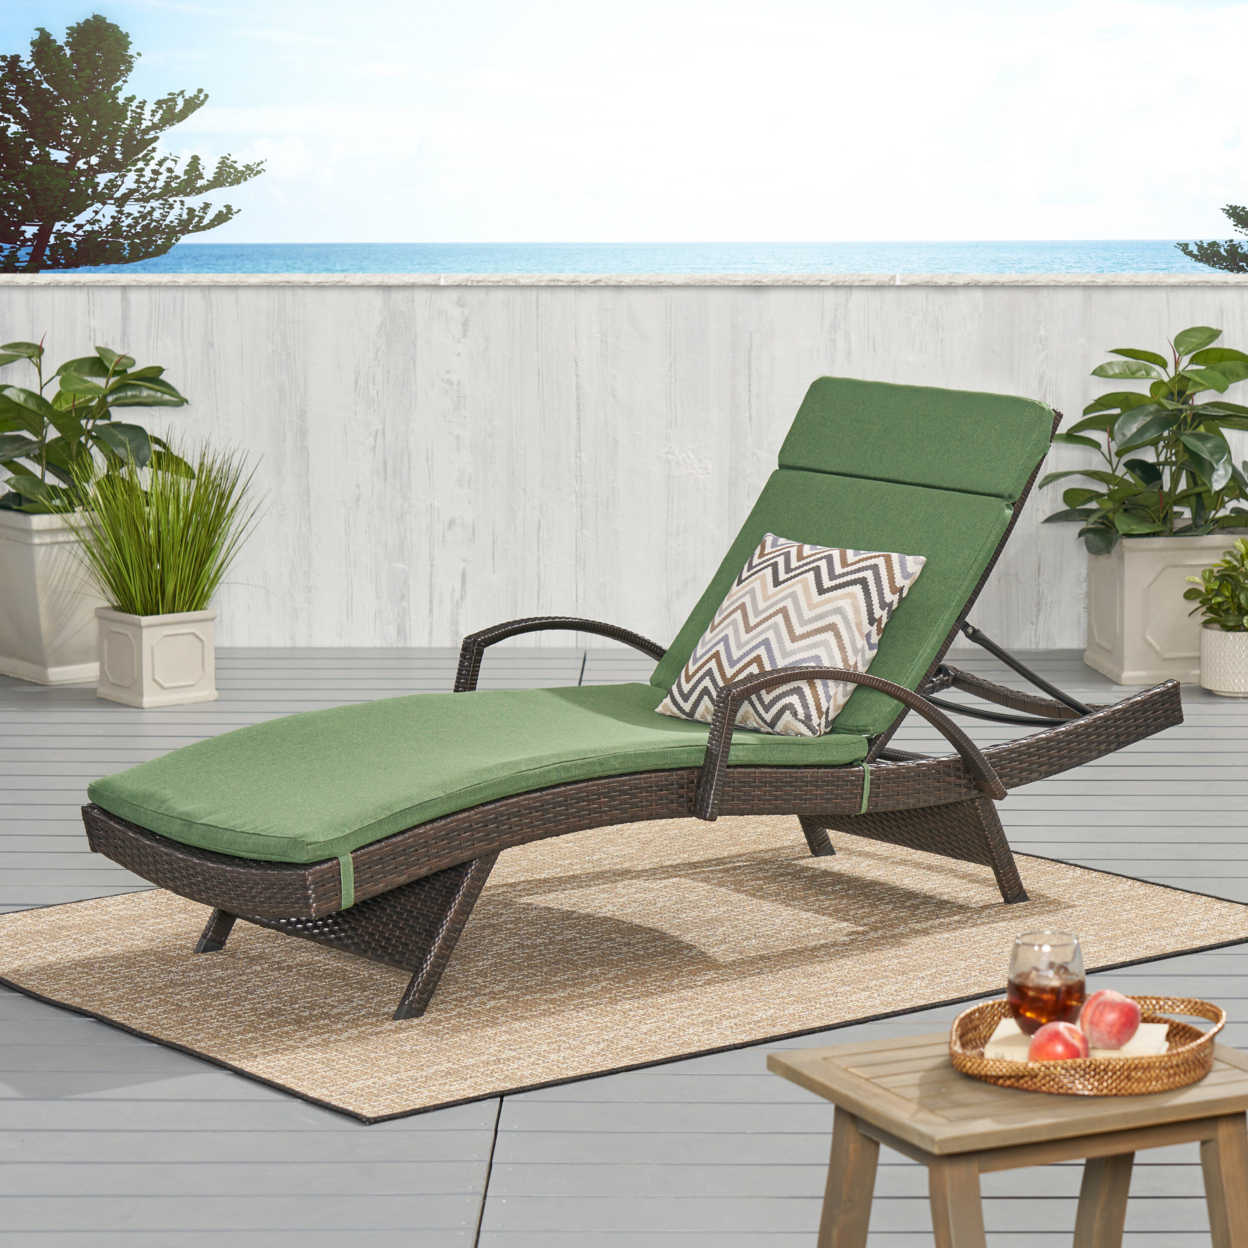 Lakeport Outdoor Adjustable Armed Chaise Lounge Chair With Cushion - Jungle Green Cushion